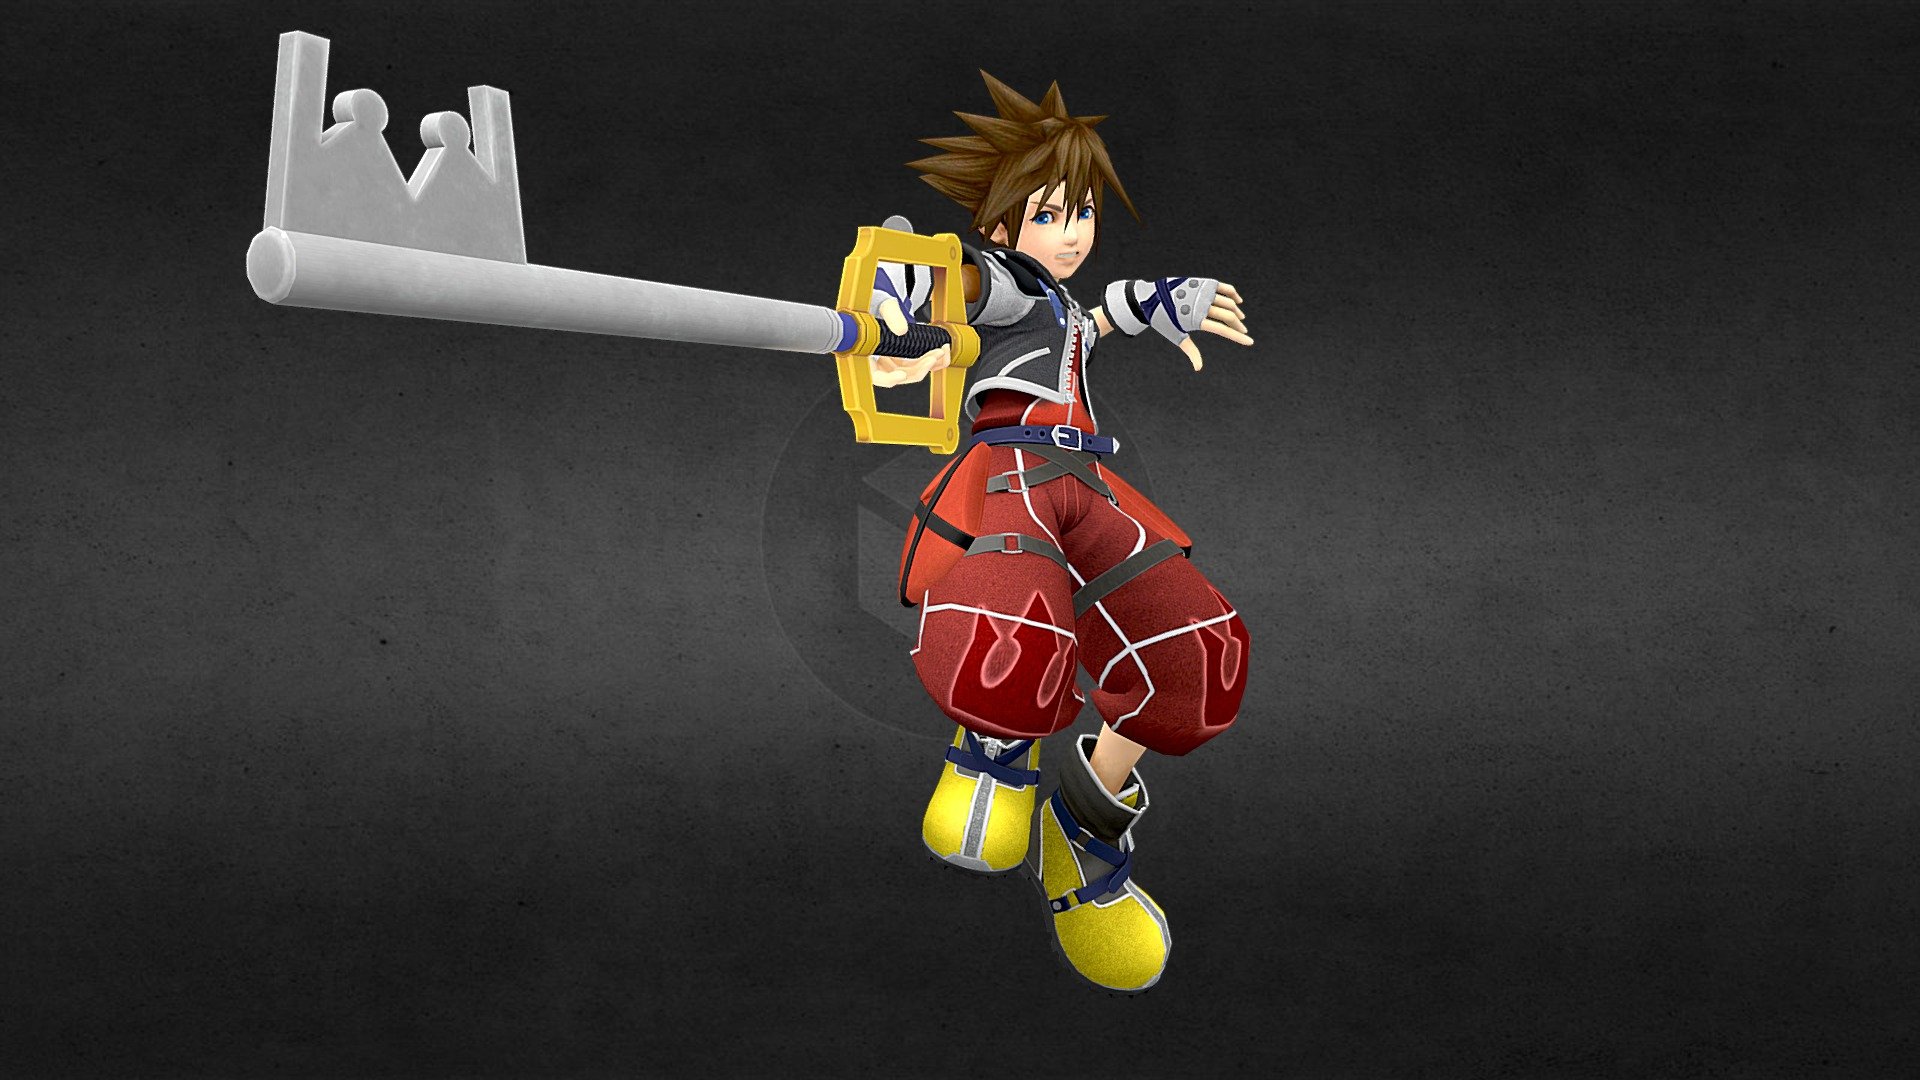 My recreation of Sora's artwork for his Limit form from Kingdom Hearts 2 Final Mix

No you can't DL this

where i got the textures
https://gamebanana.com/mods/345064

I'll admit, the hair model needs fixing - Sora (Limit Form Art) SSBU Styled - 3D model by MG64 (@mariogamer64) 3d model